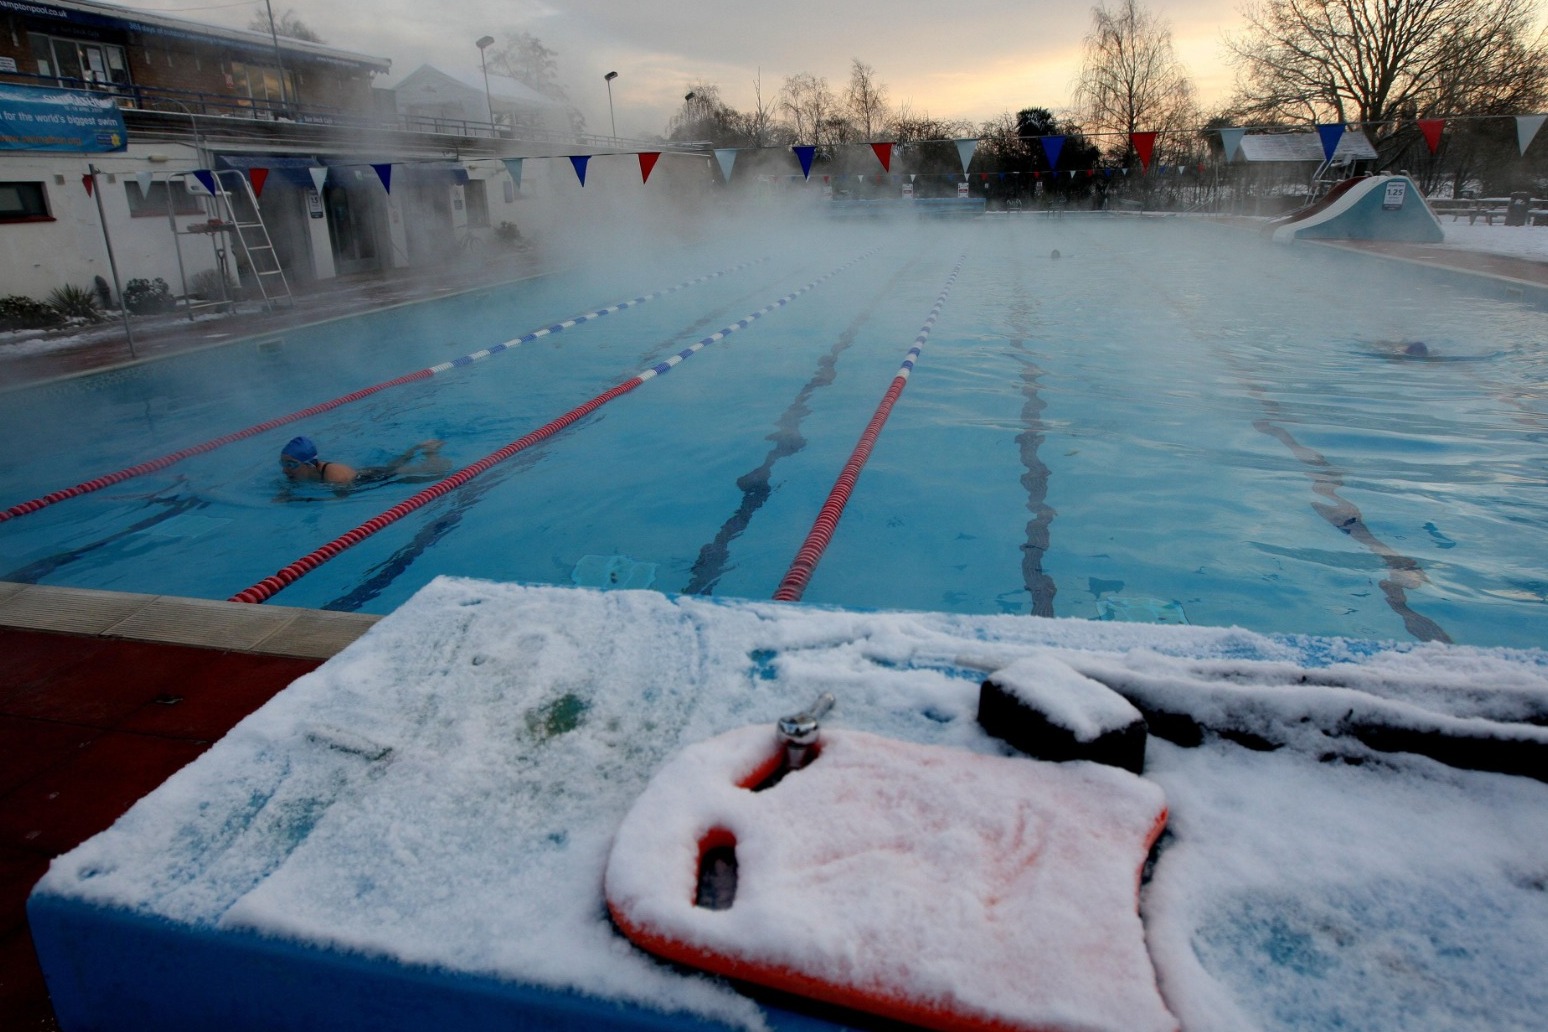 Icy swim may cut ‘bad’ body fat but further health benefits unclear – study 